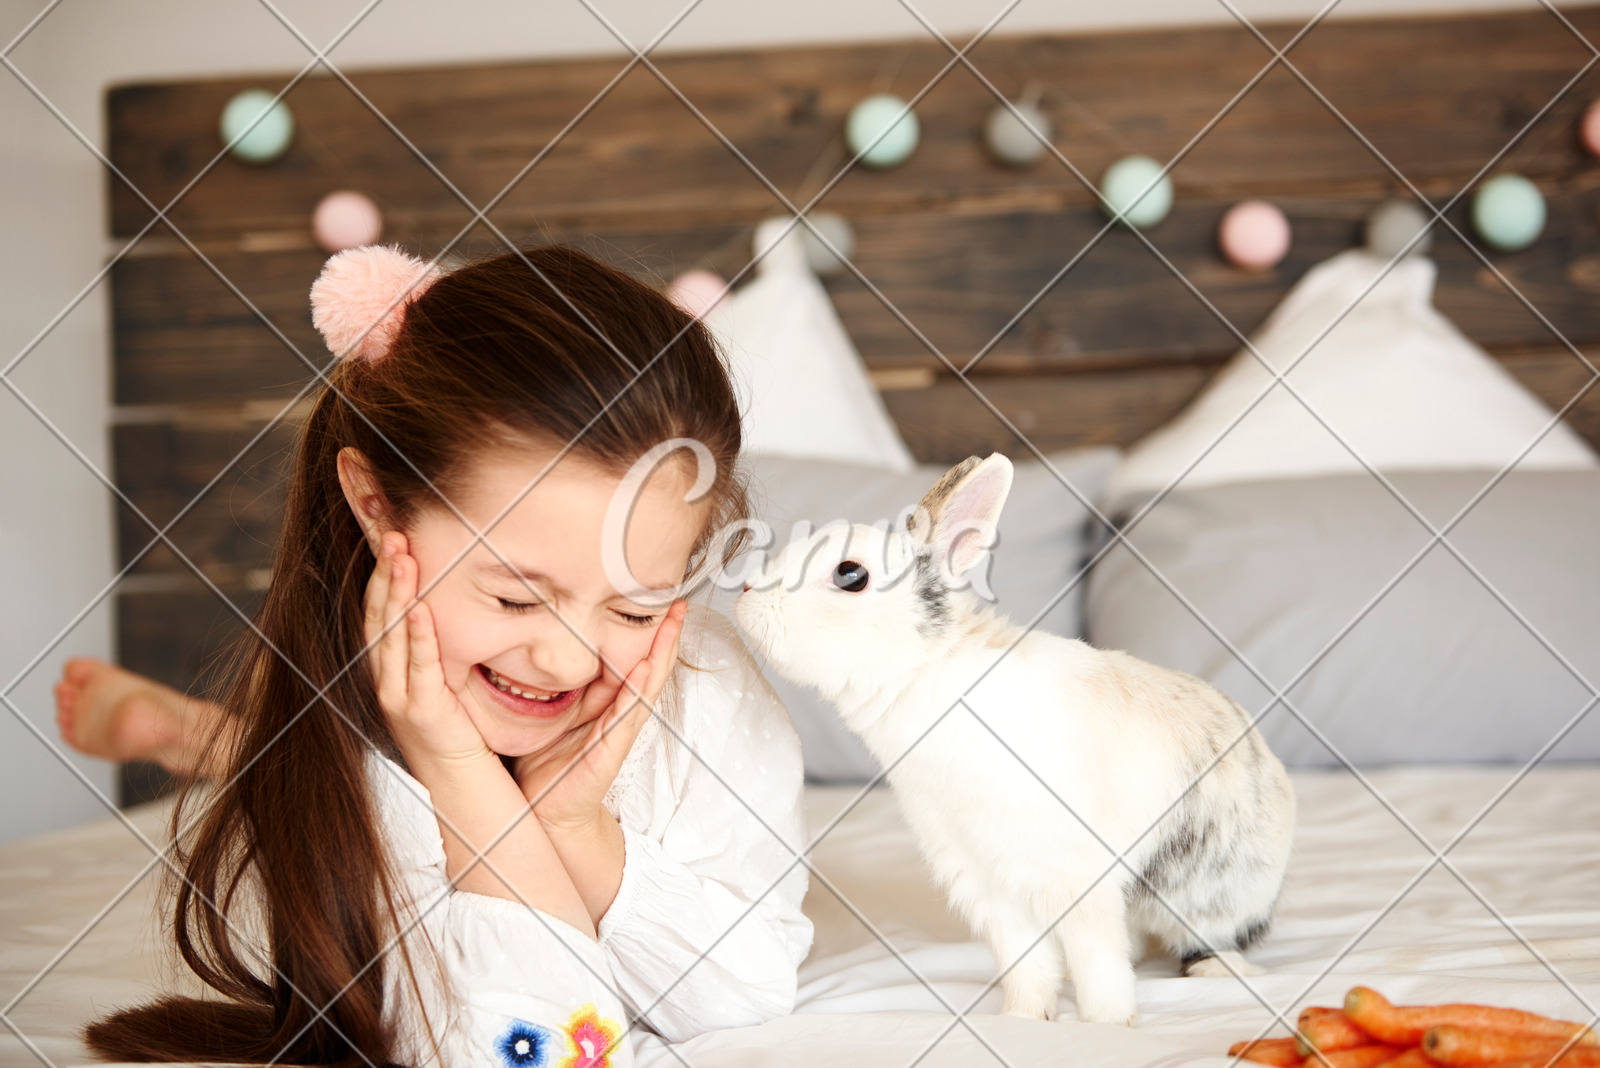 Girl And Baby Rabbit Having Fun At The Bedroom Photos By Canva